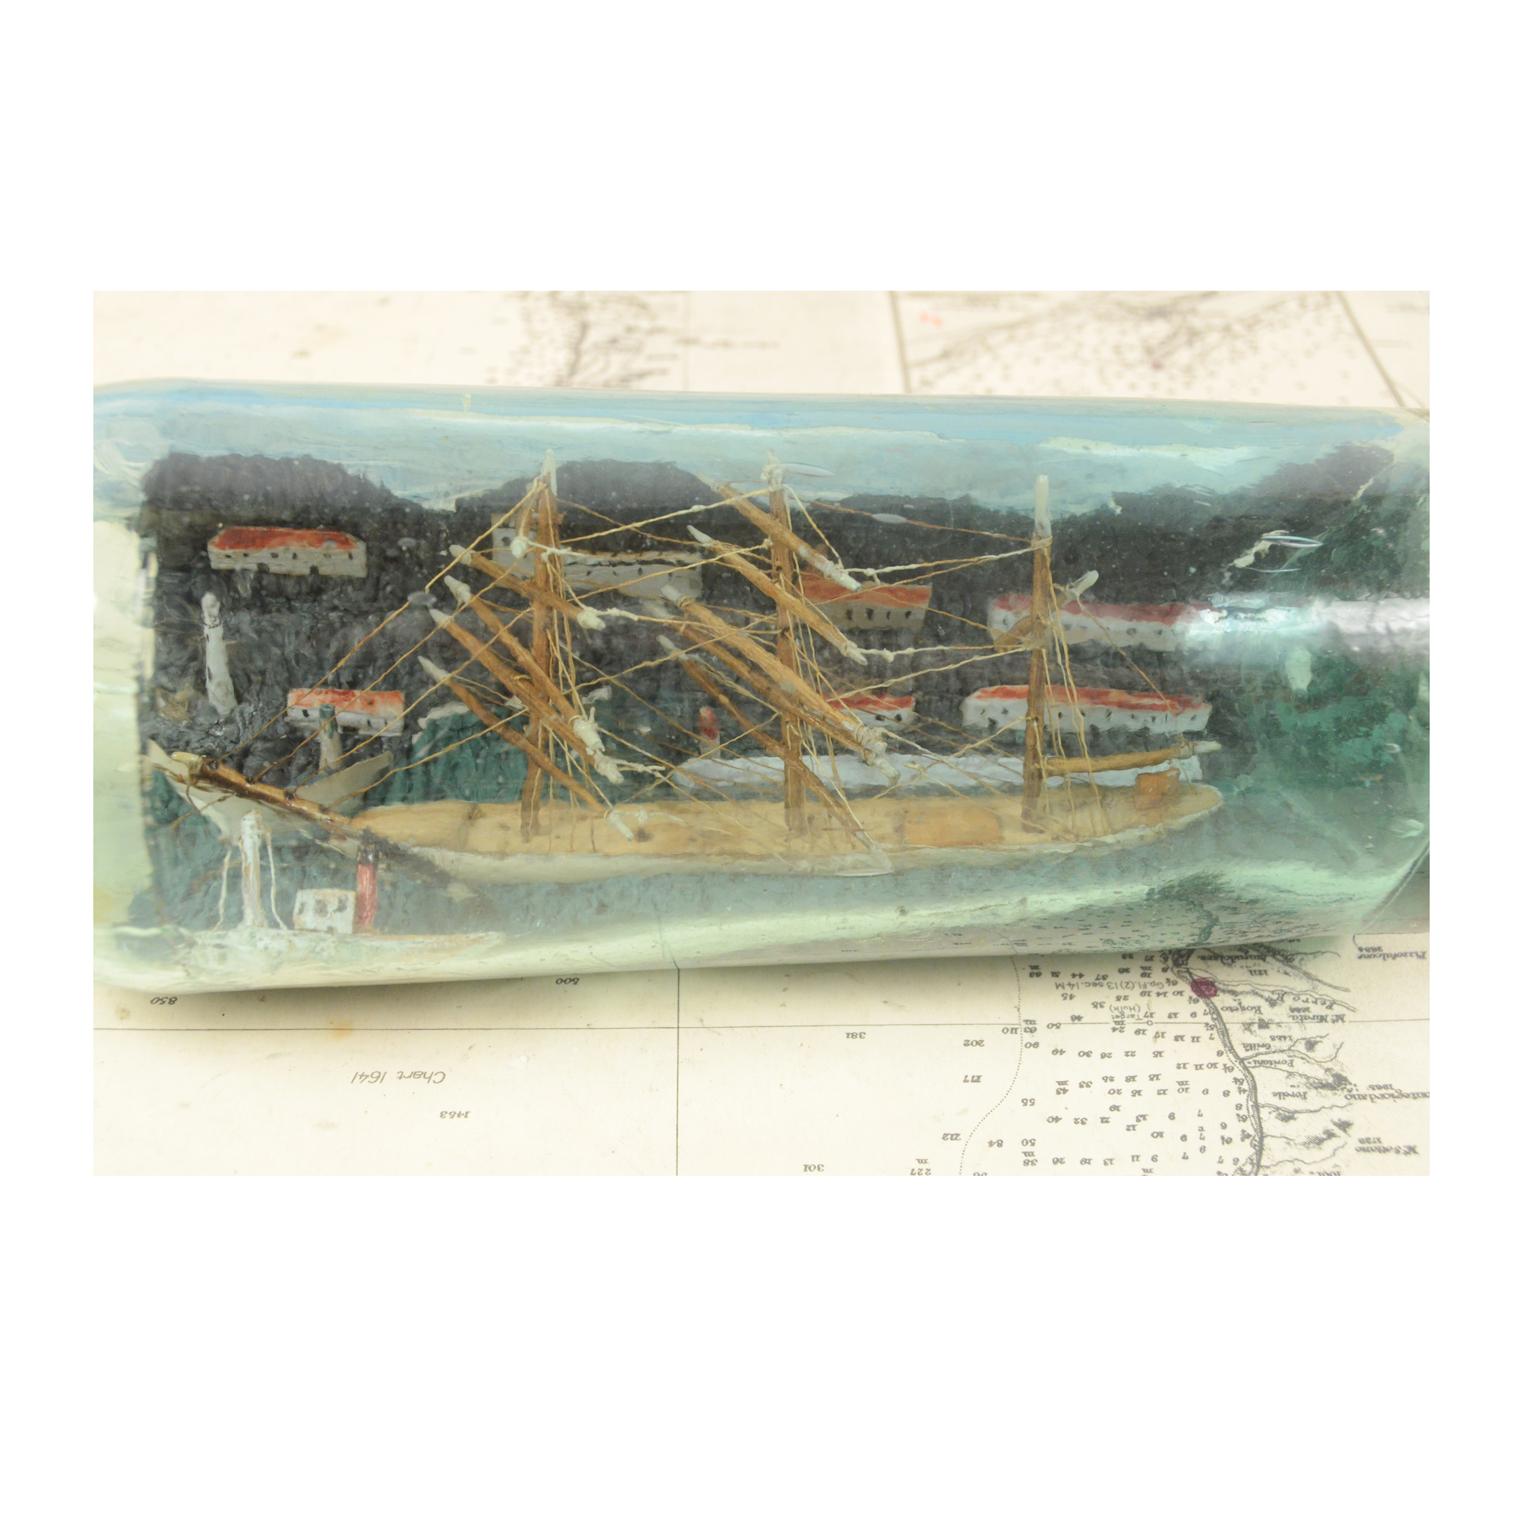 Glass Diorama in a Bottle, Depicting a 3-Masted Ship, 1920s